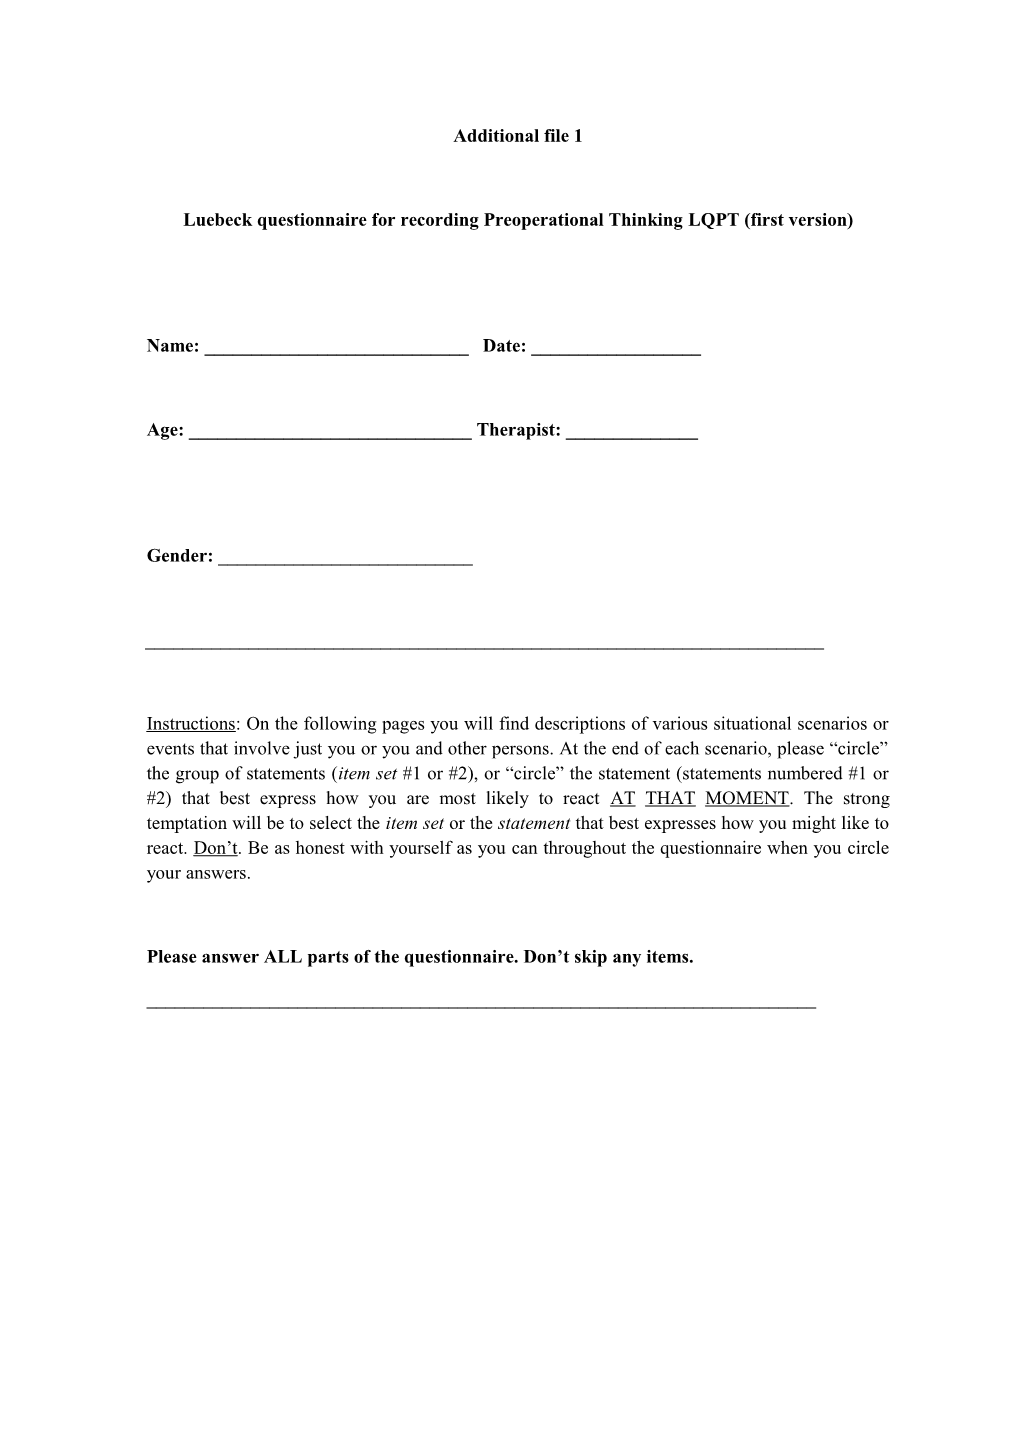 Luebeck Questionnaire for Recording Preoperational Thinking LQPT (First Version)